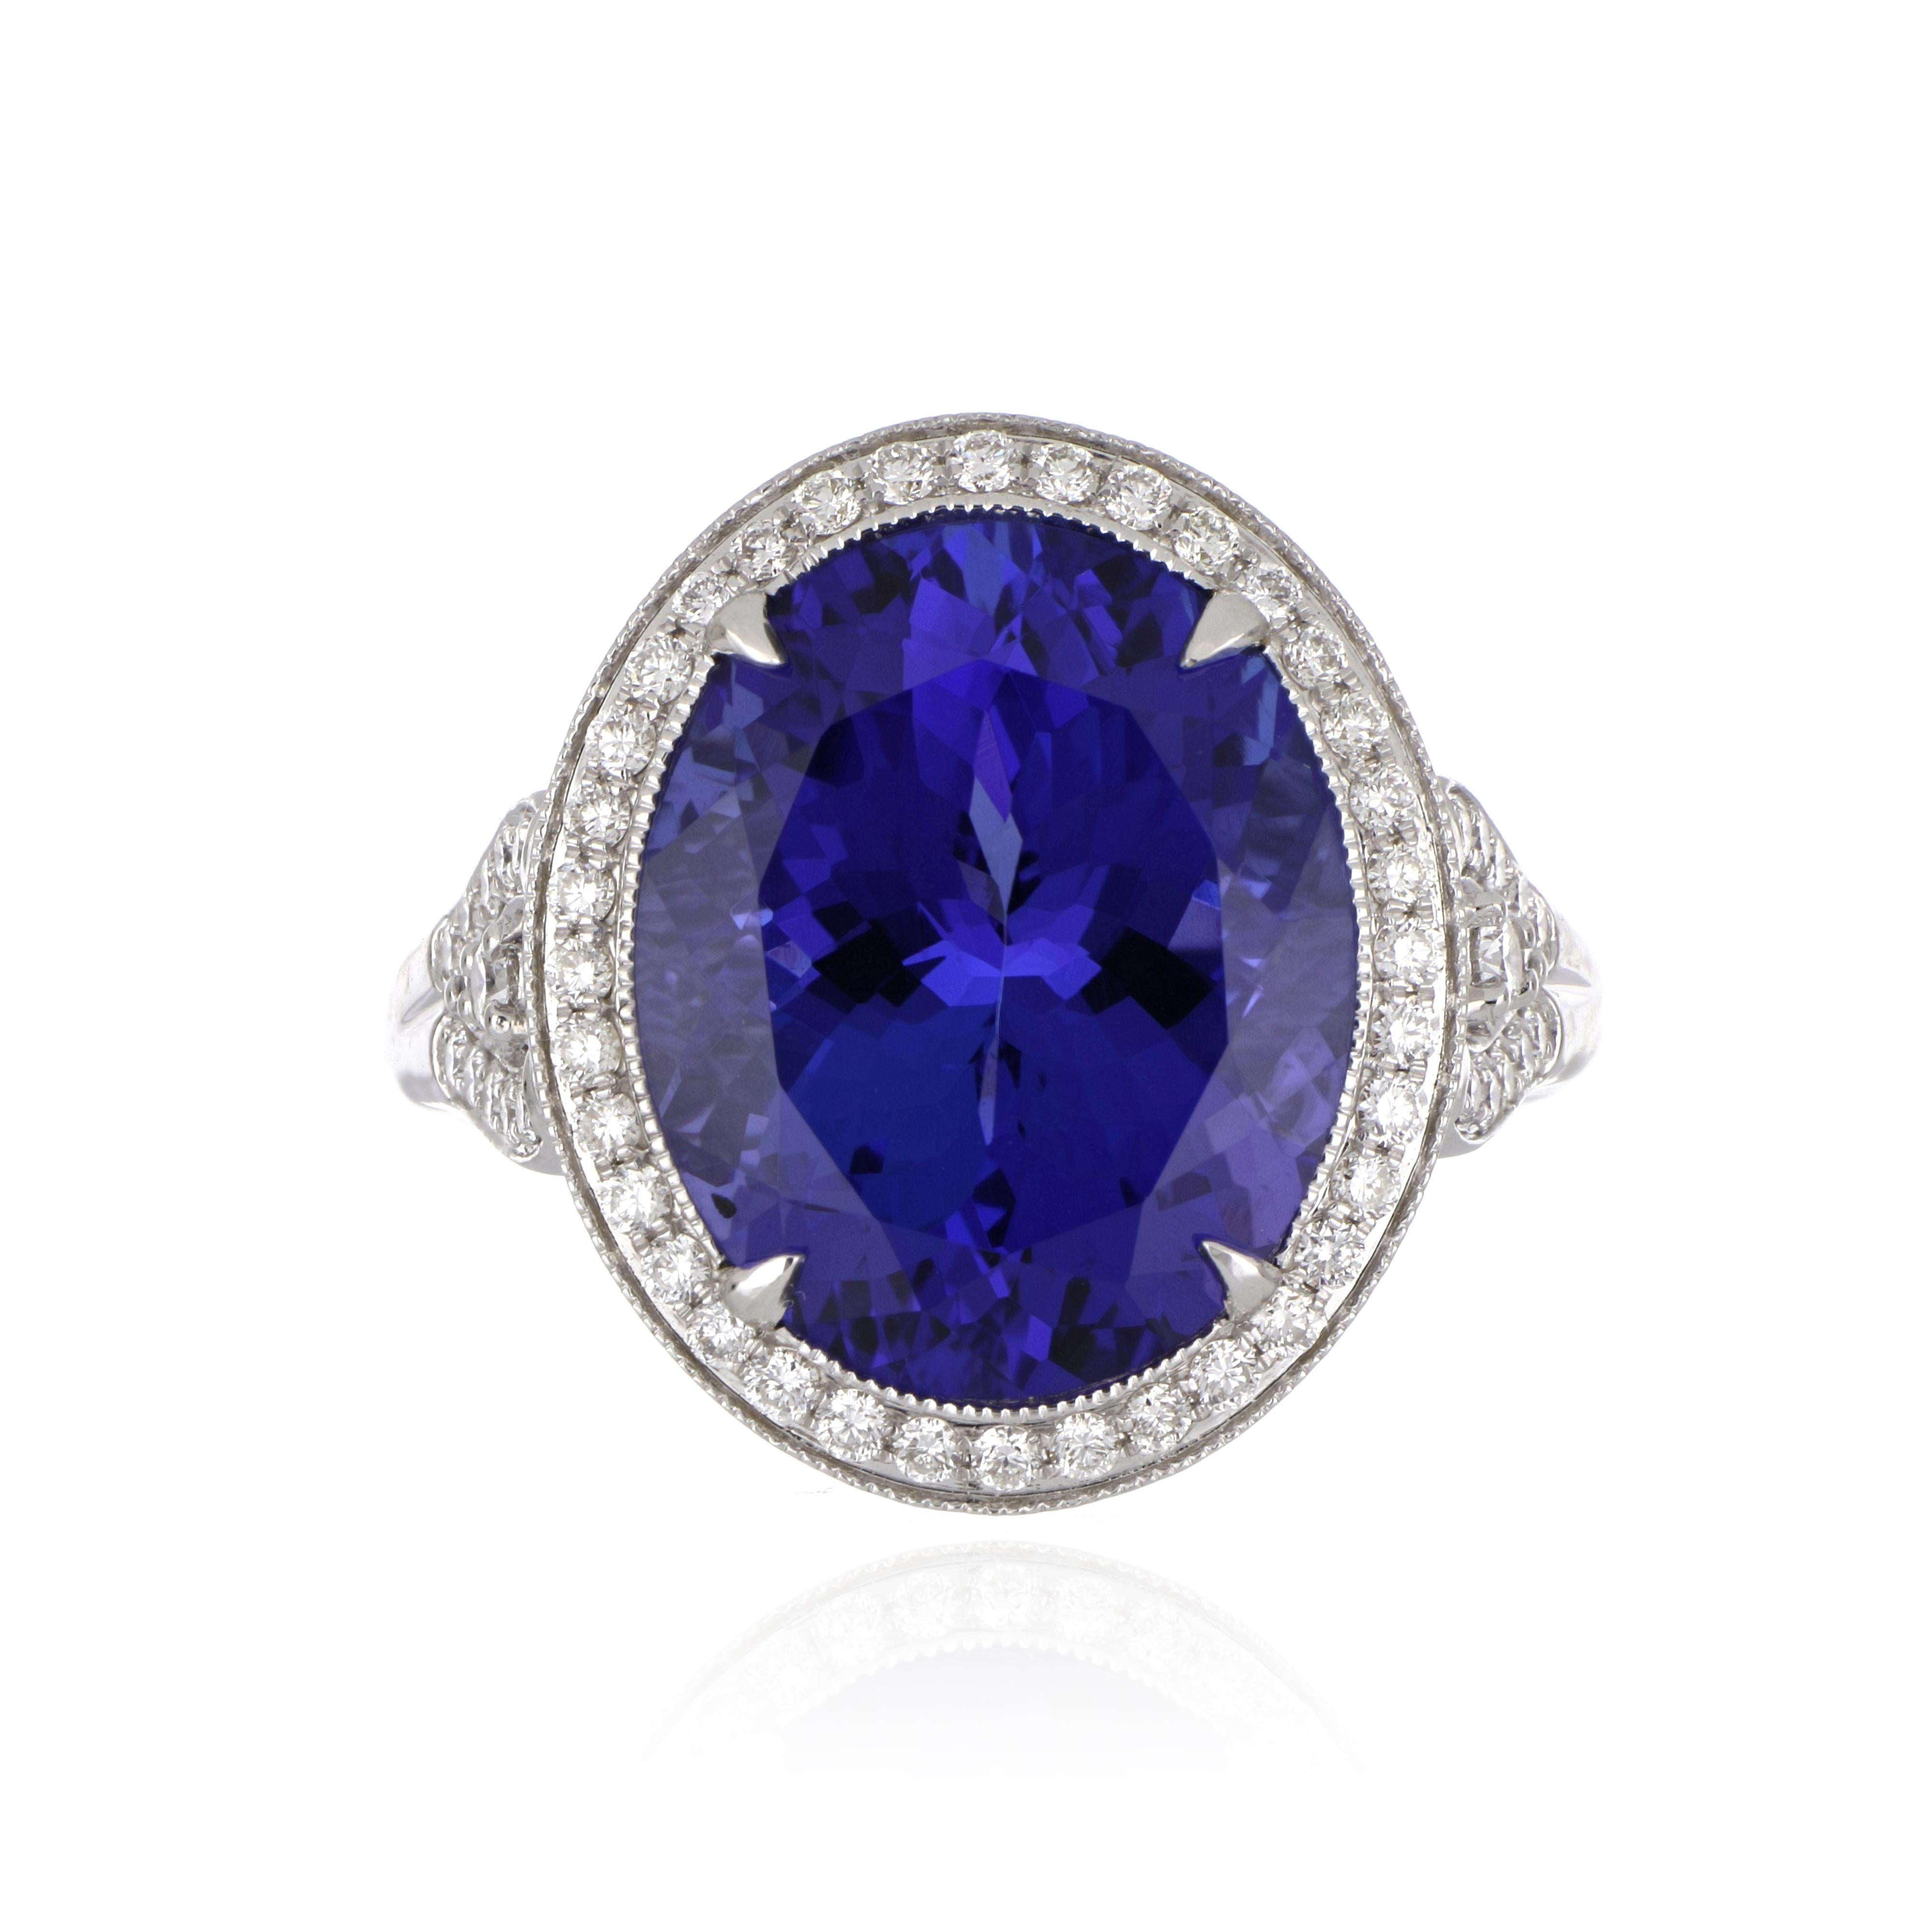 Elegant and exquisitely detailed 18K Ring, centre set with 10.75 Ct Tanzanite, surrounded by and enhanced on shank with micro pave Diamonds, weighing approx. 0.65 total carat weight. Beautifully Hand crafted in 18 Karat white Gold.

Stone Size: 15.4